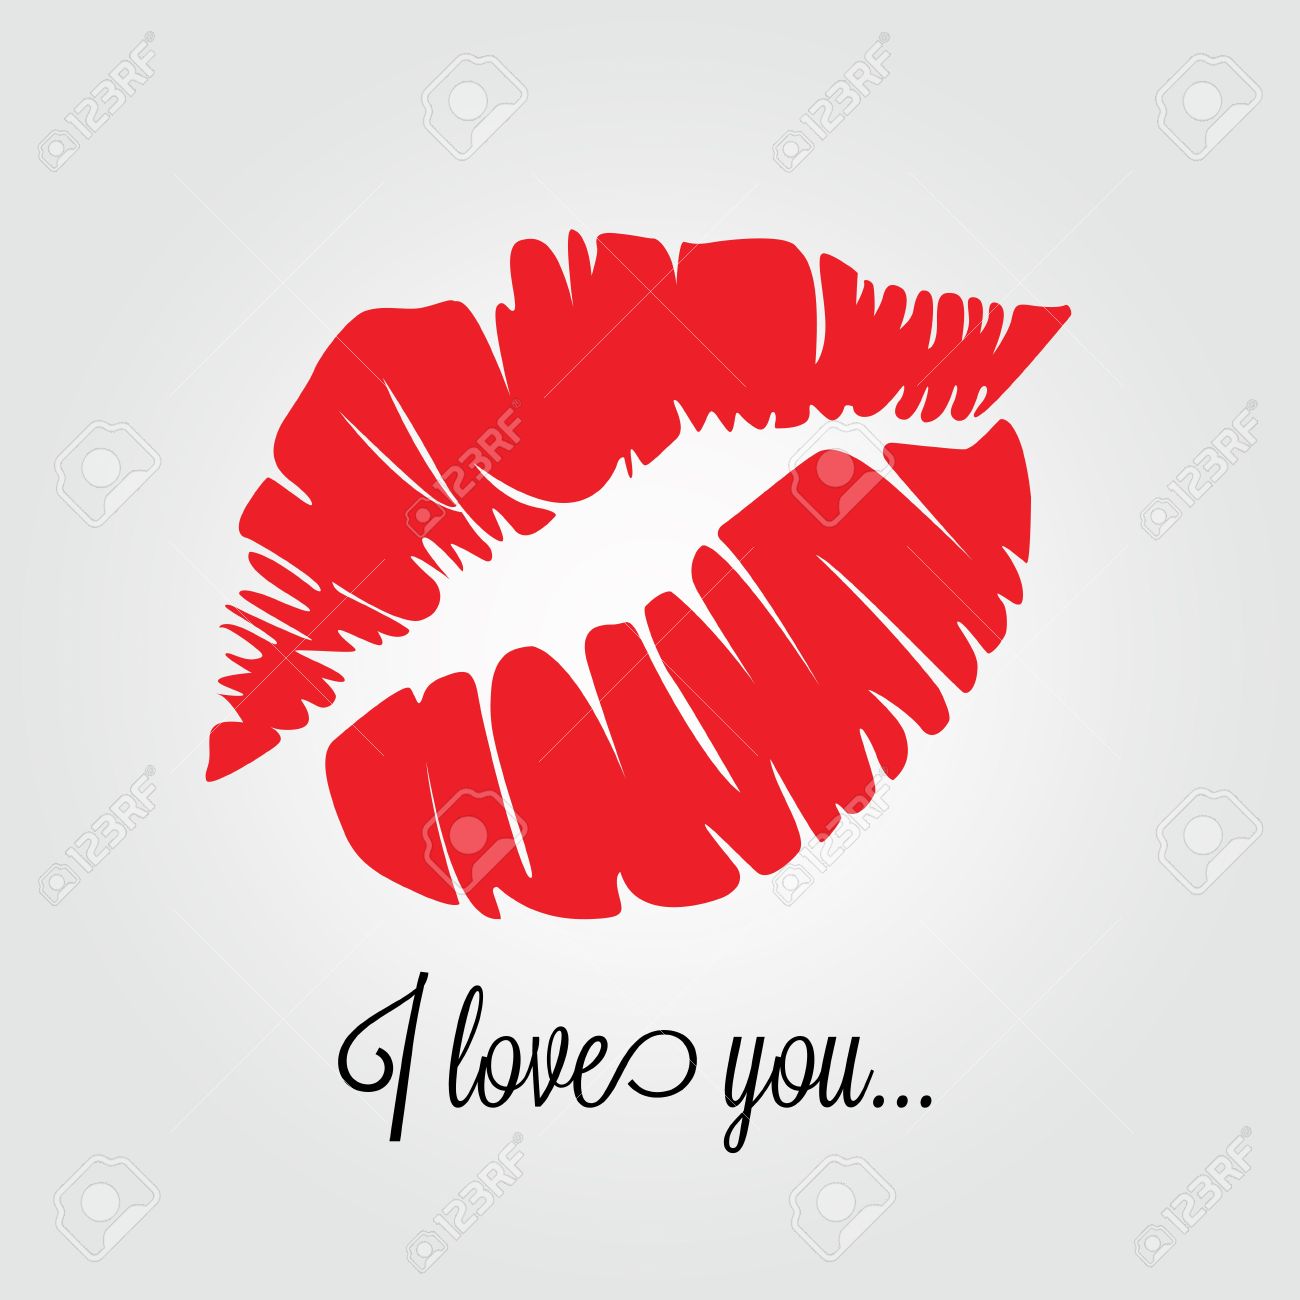 21124881-abstract-kiss-with-text-i-love-you.jpg